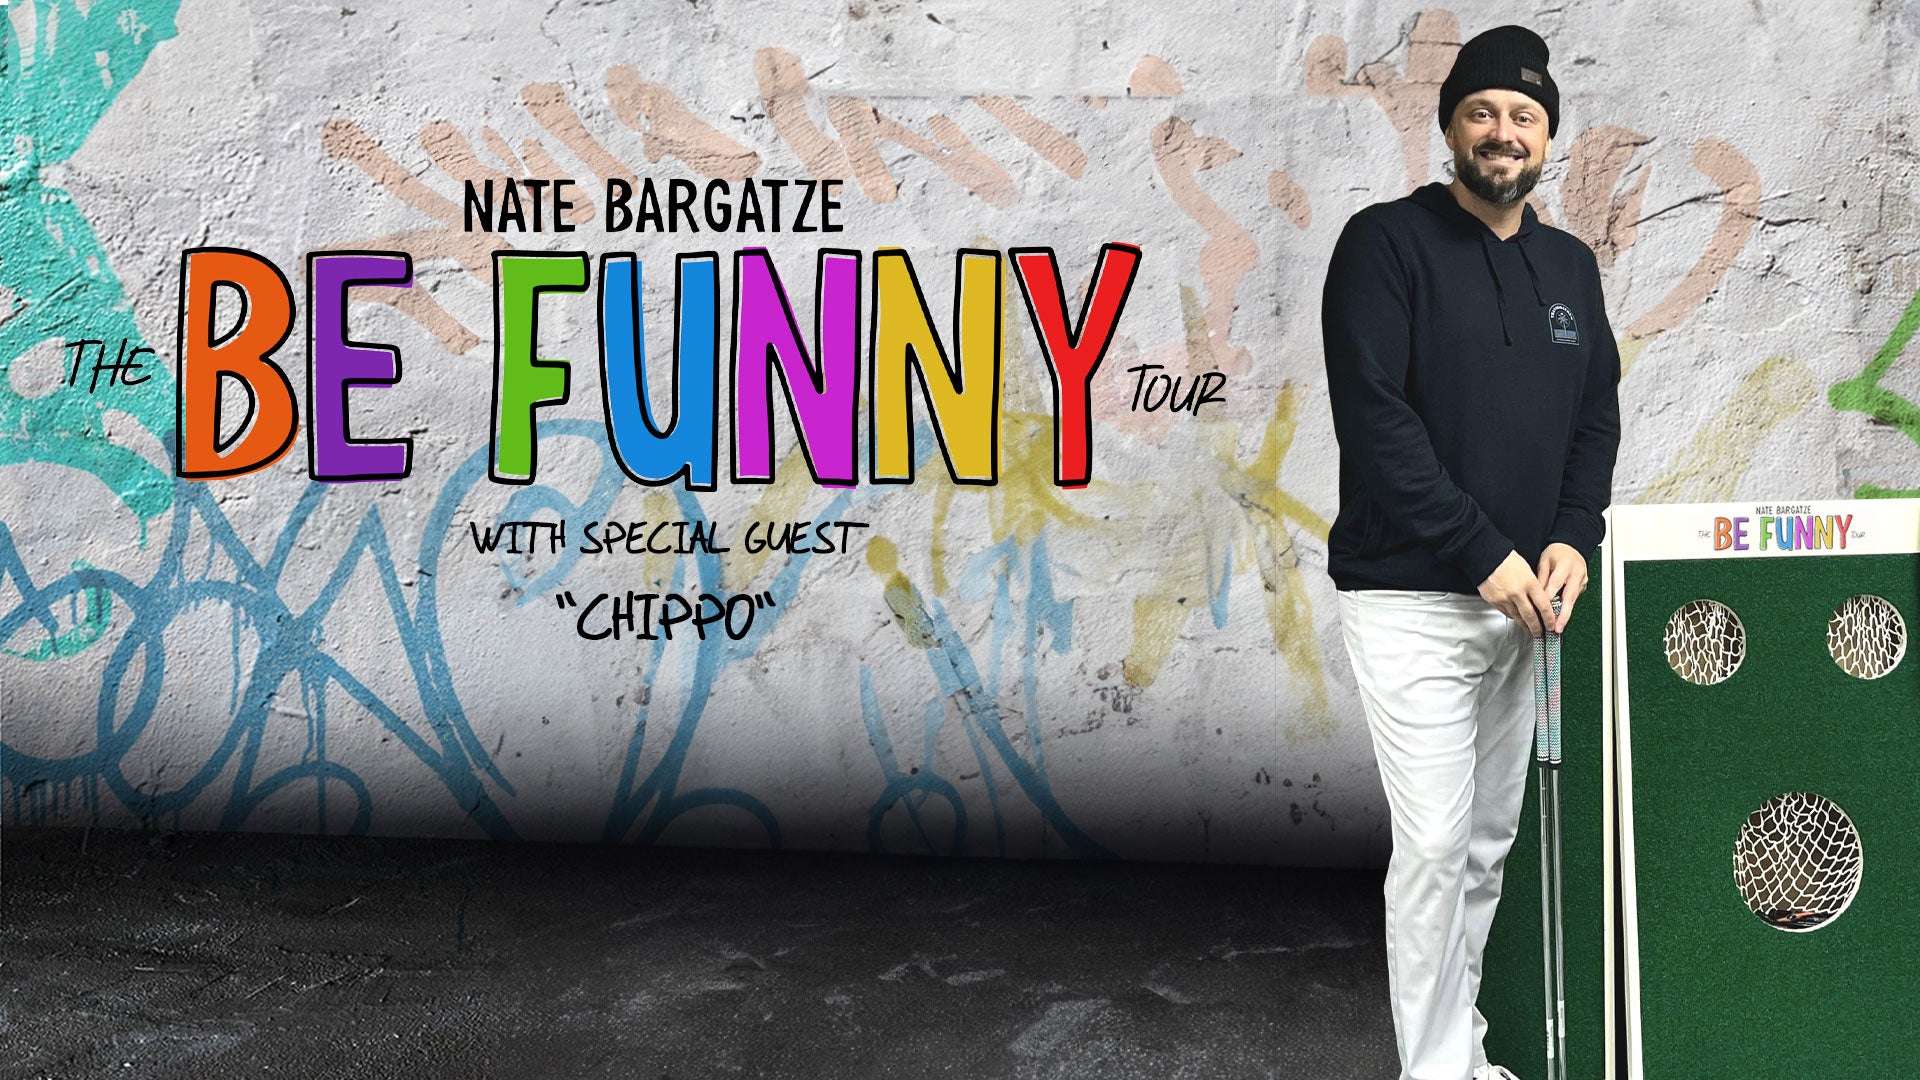 Comedian Nate Bargatze Sells Out Spokane Arena, Befriends Golf Game “Chippo” and Invites Chippo to Open for Him for Remainder of Tour